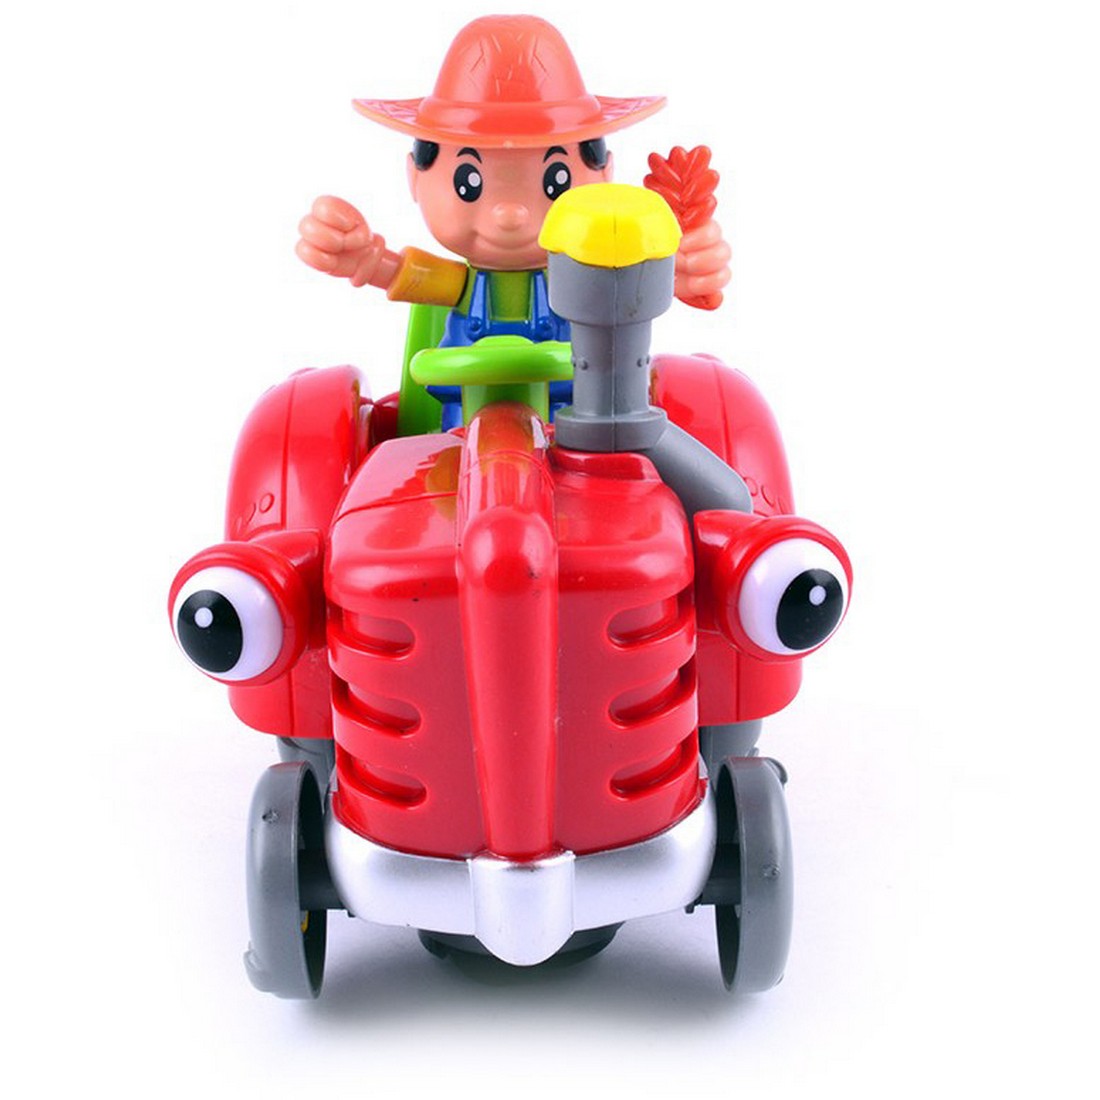 Get The Best Action Figure Toys For Your Kid From Online Store